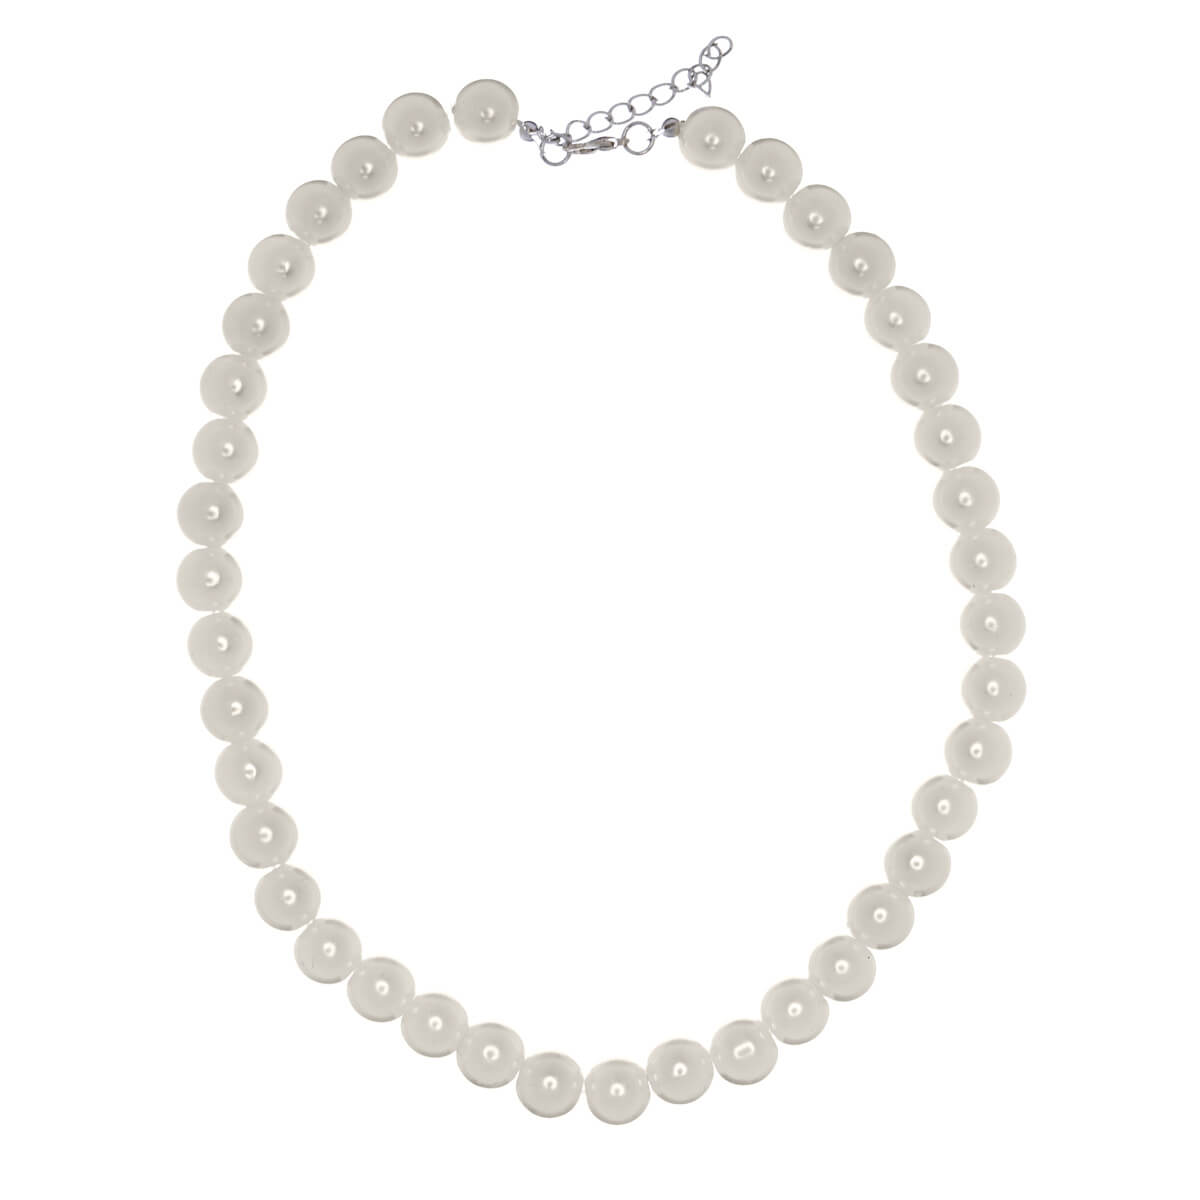 Pearl necklace necklace beads 12mm 49cm +5cm